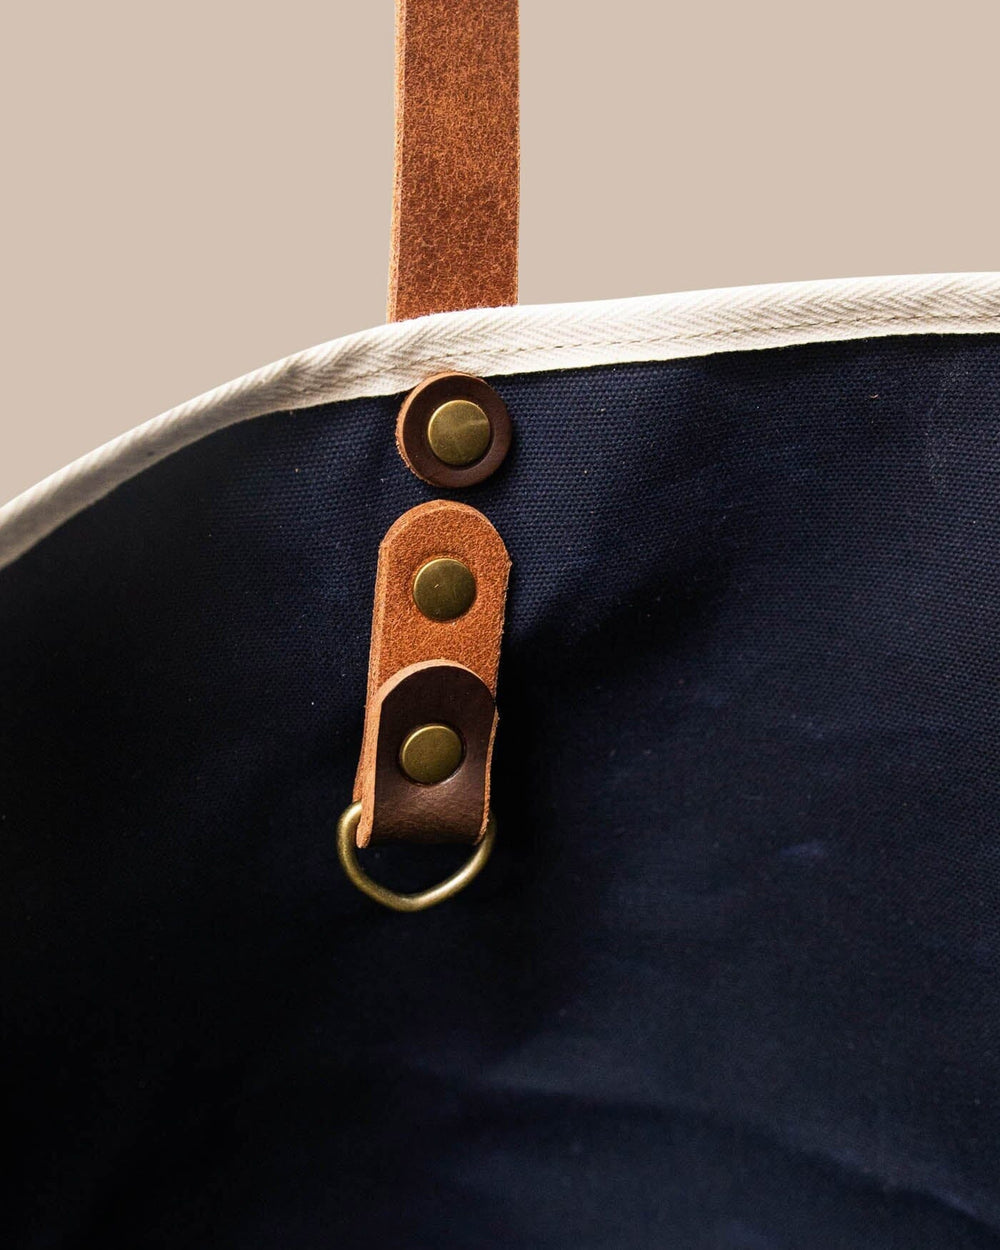 The detail view of the Southern Tide All Day Denim Tote by Southern Tide - Navy